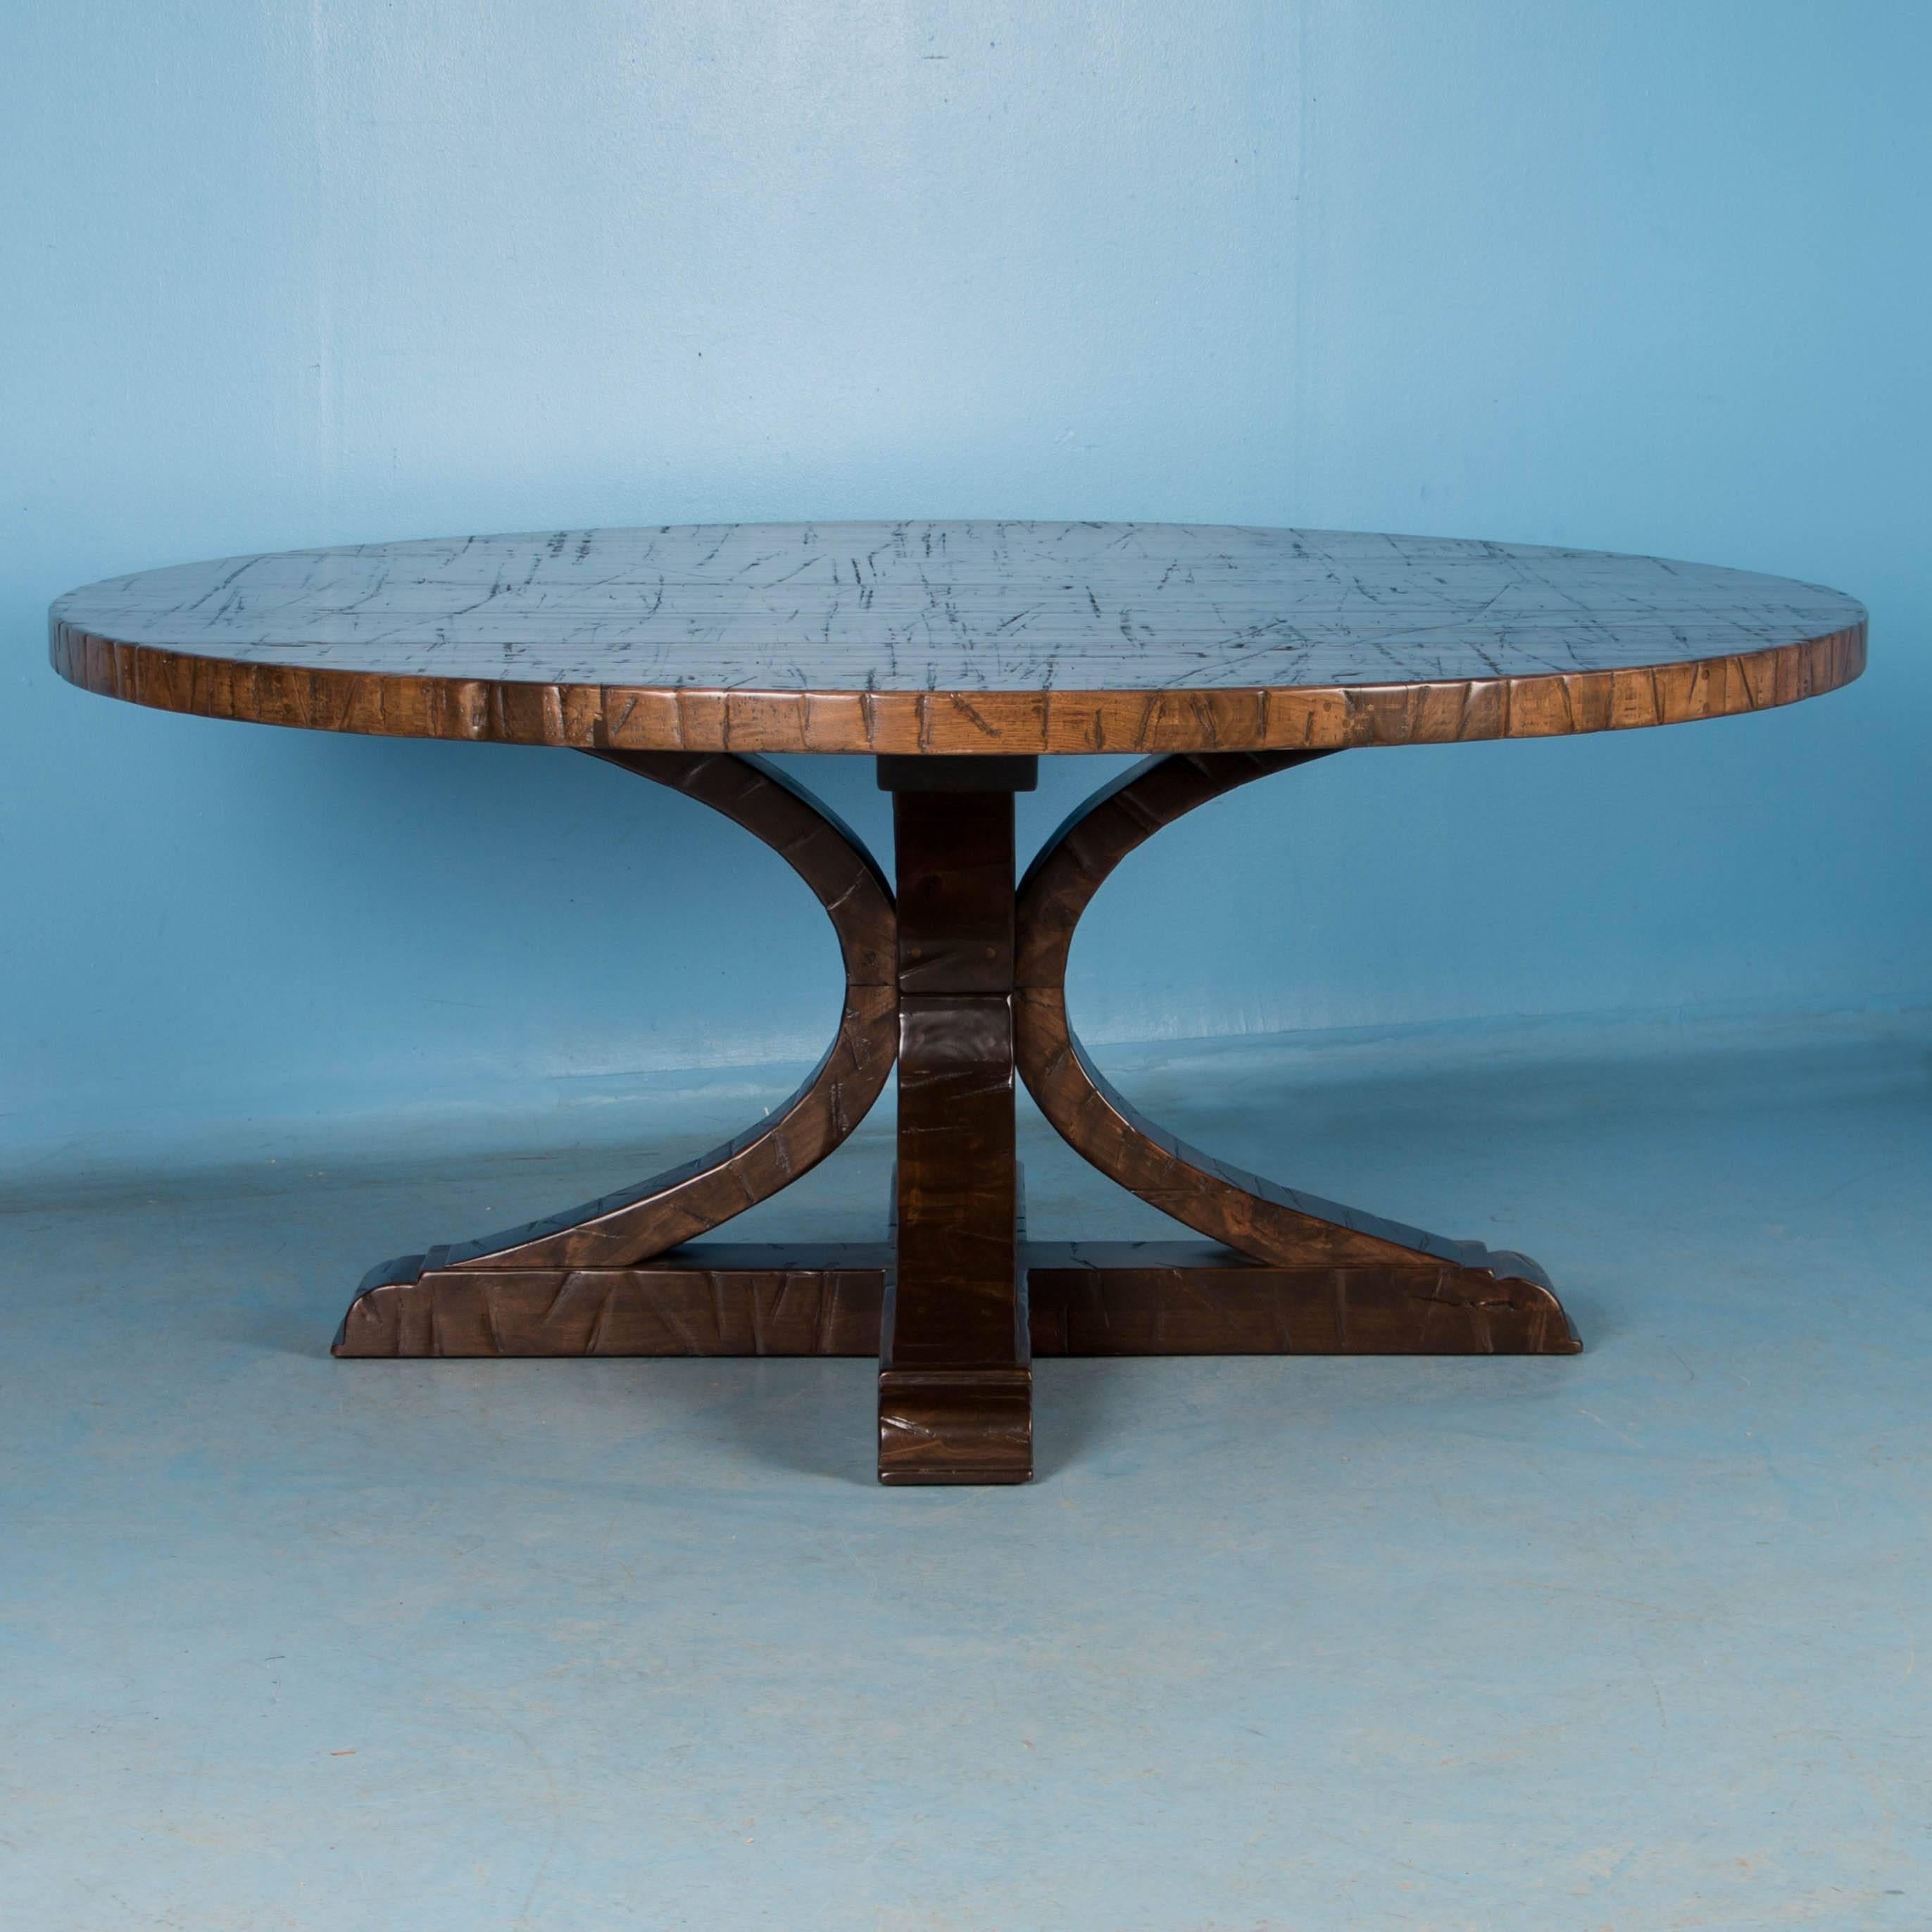 This large round dining table was custom-made using reclaimed maple boxcar flooring. The distressed wood is a result of years of moving cargo through the train’s boxcars – it has been sanded, stained and given a strong finish for daily use. At six